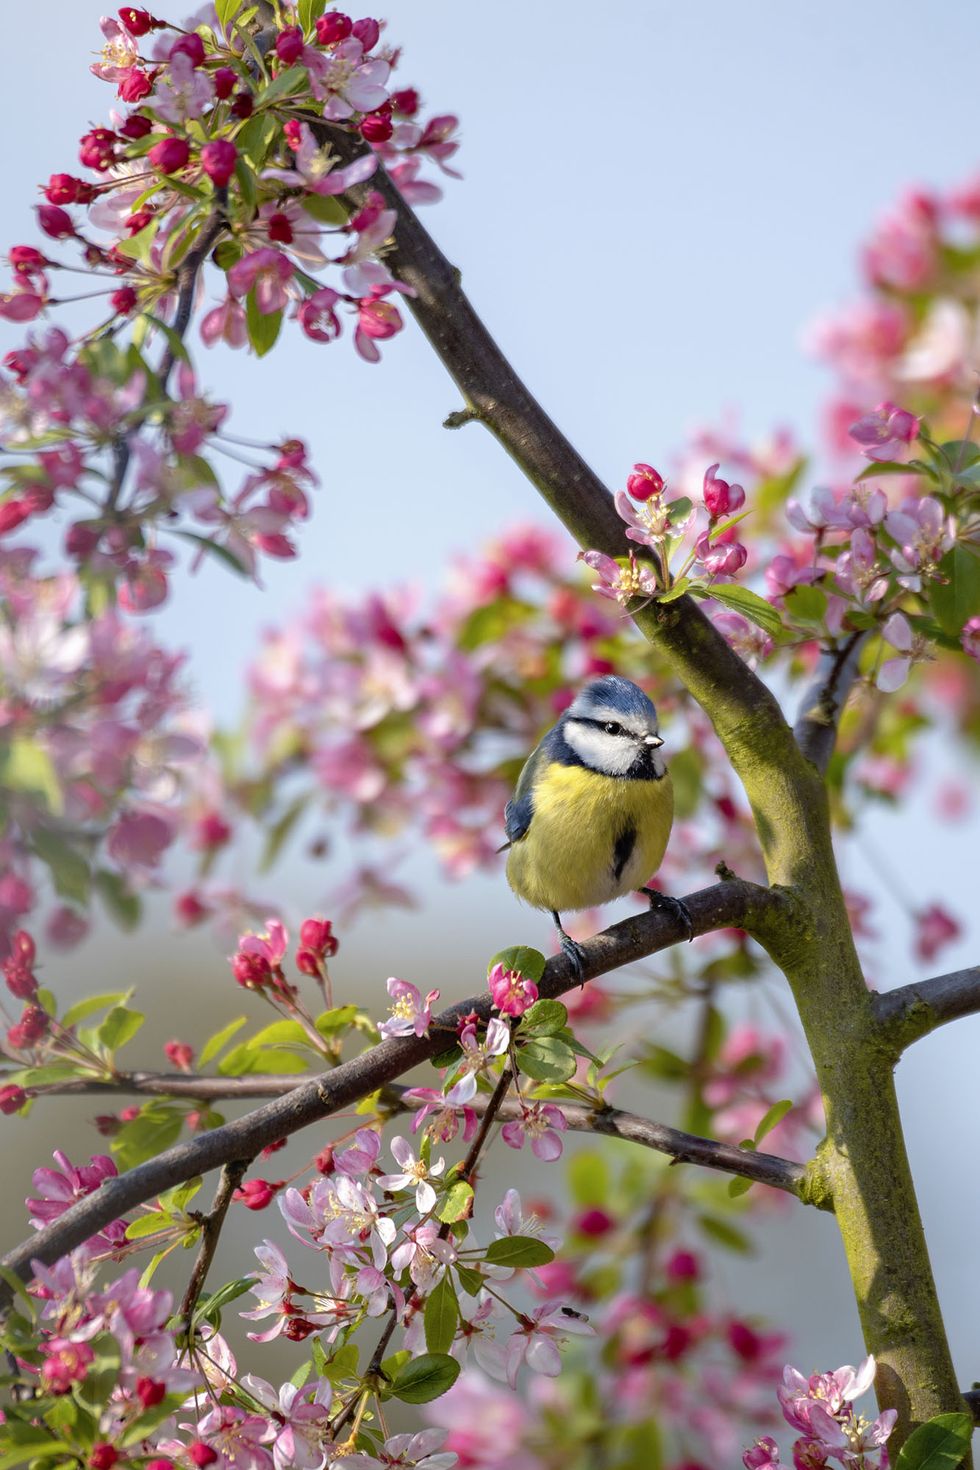 Close-up image of an Eurasian blue tit on the branch of Malus 'Floribunda' Crab apple blossom against a blue sky